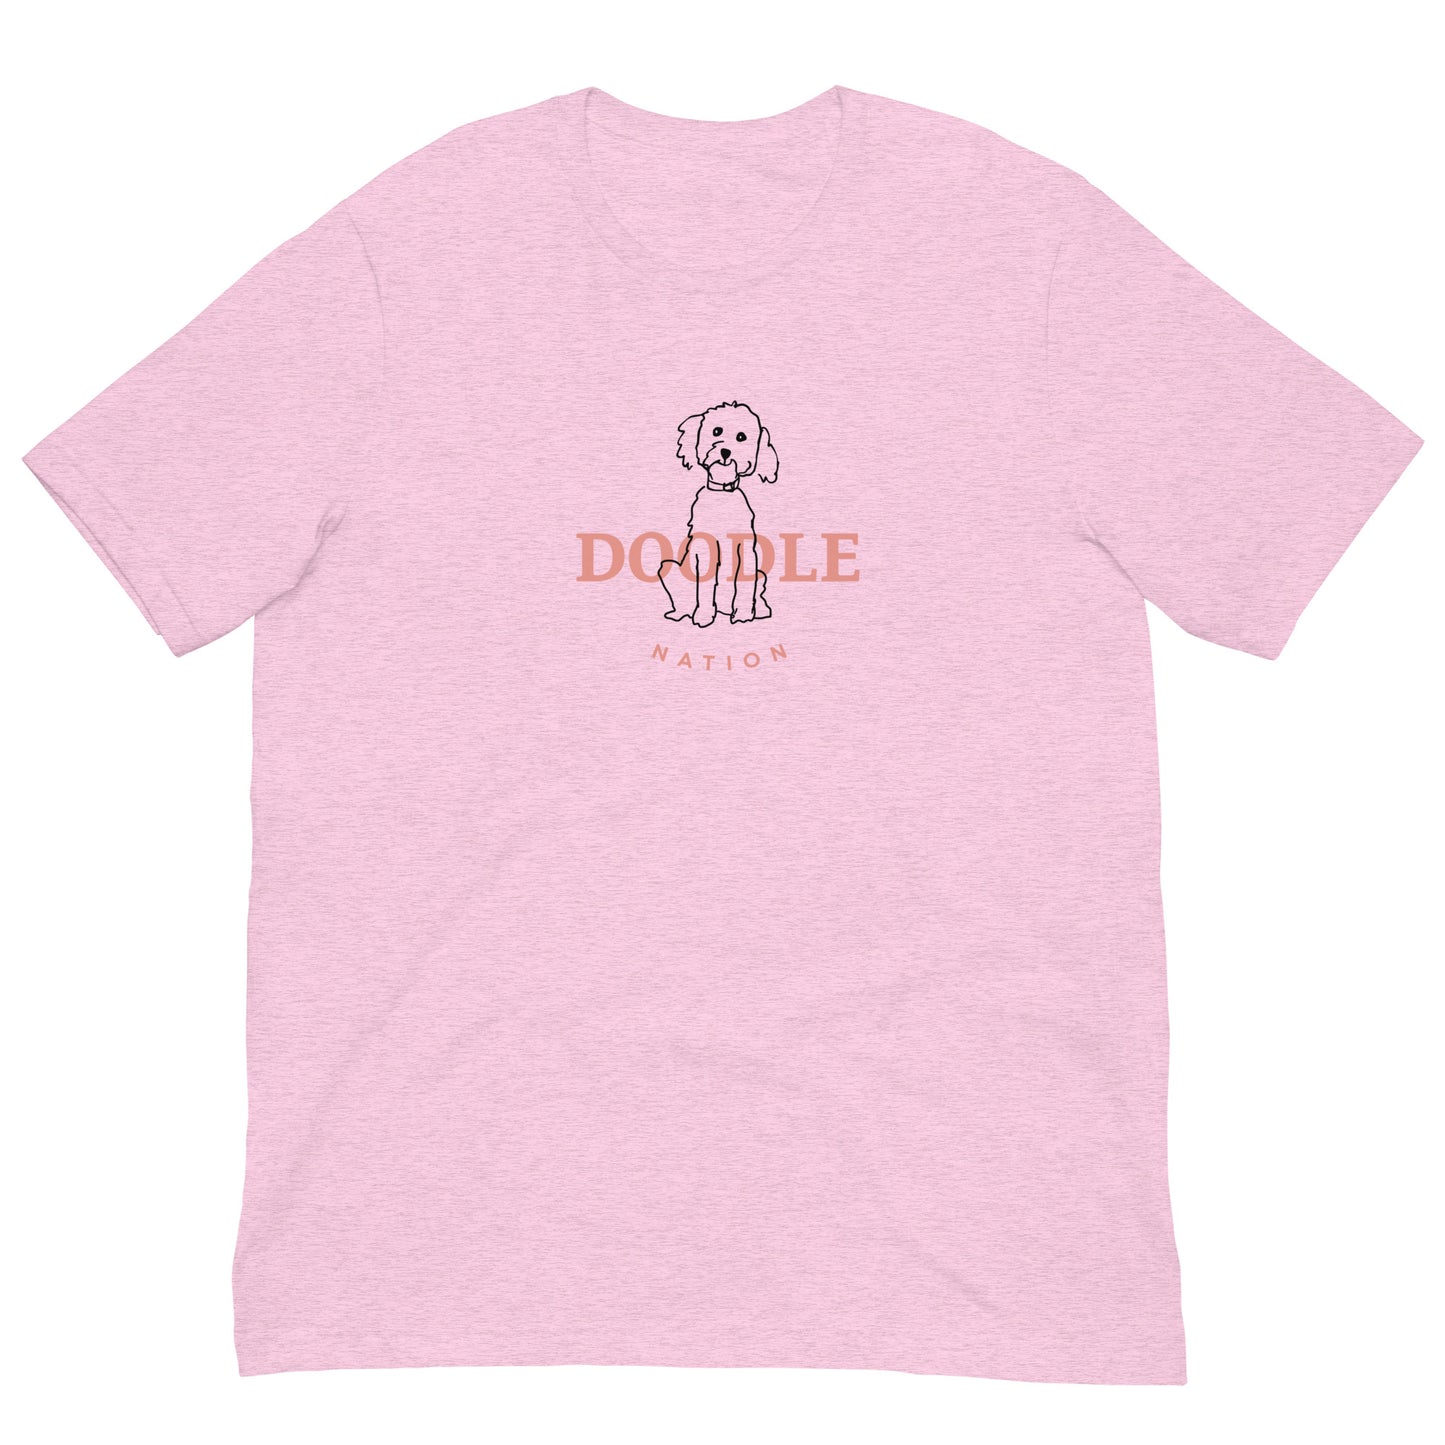 Goldendoodle t-shirt with Goldendoodle and words "Doodle Nation" in light pink  color